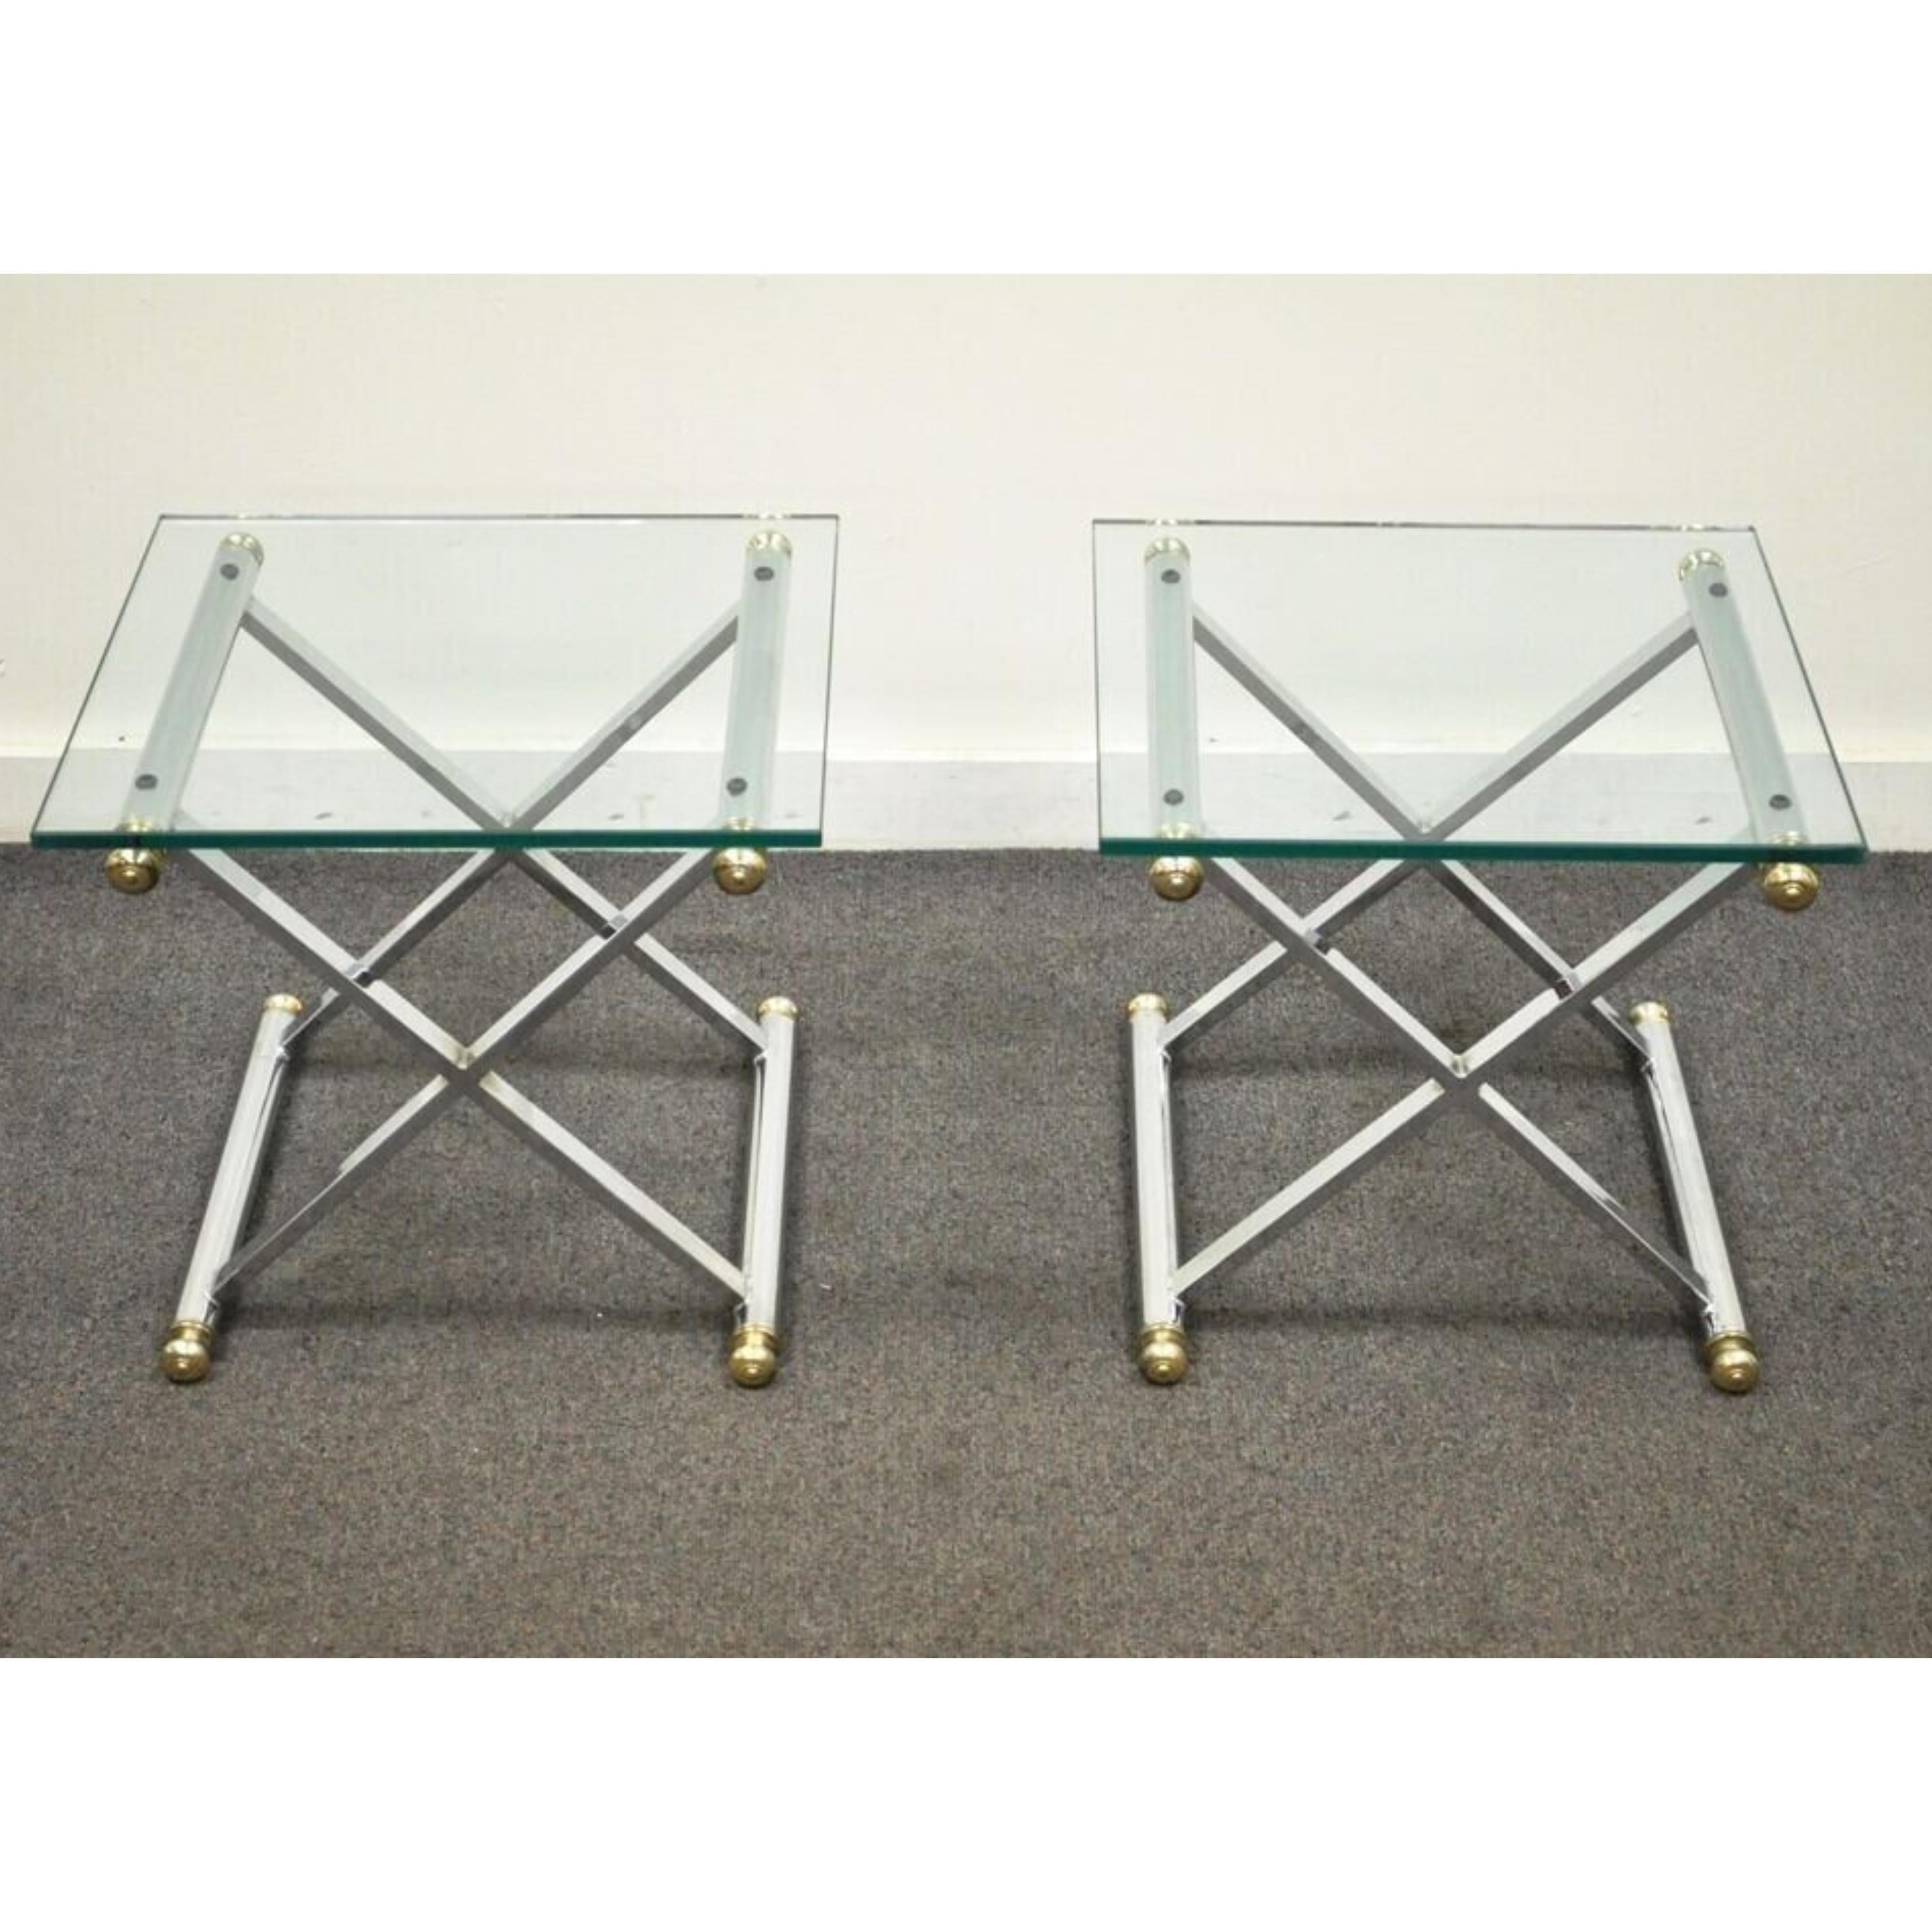 Mid Century Modern Hollywood Regency Chrome Brass Glass X Form Side Tables - a Pair. Item features  an X-form stretcher base, thick glass, very nice vintage item.  Circa Mid to Late 20th Century. Measurements: 15.75